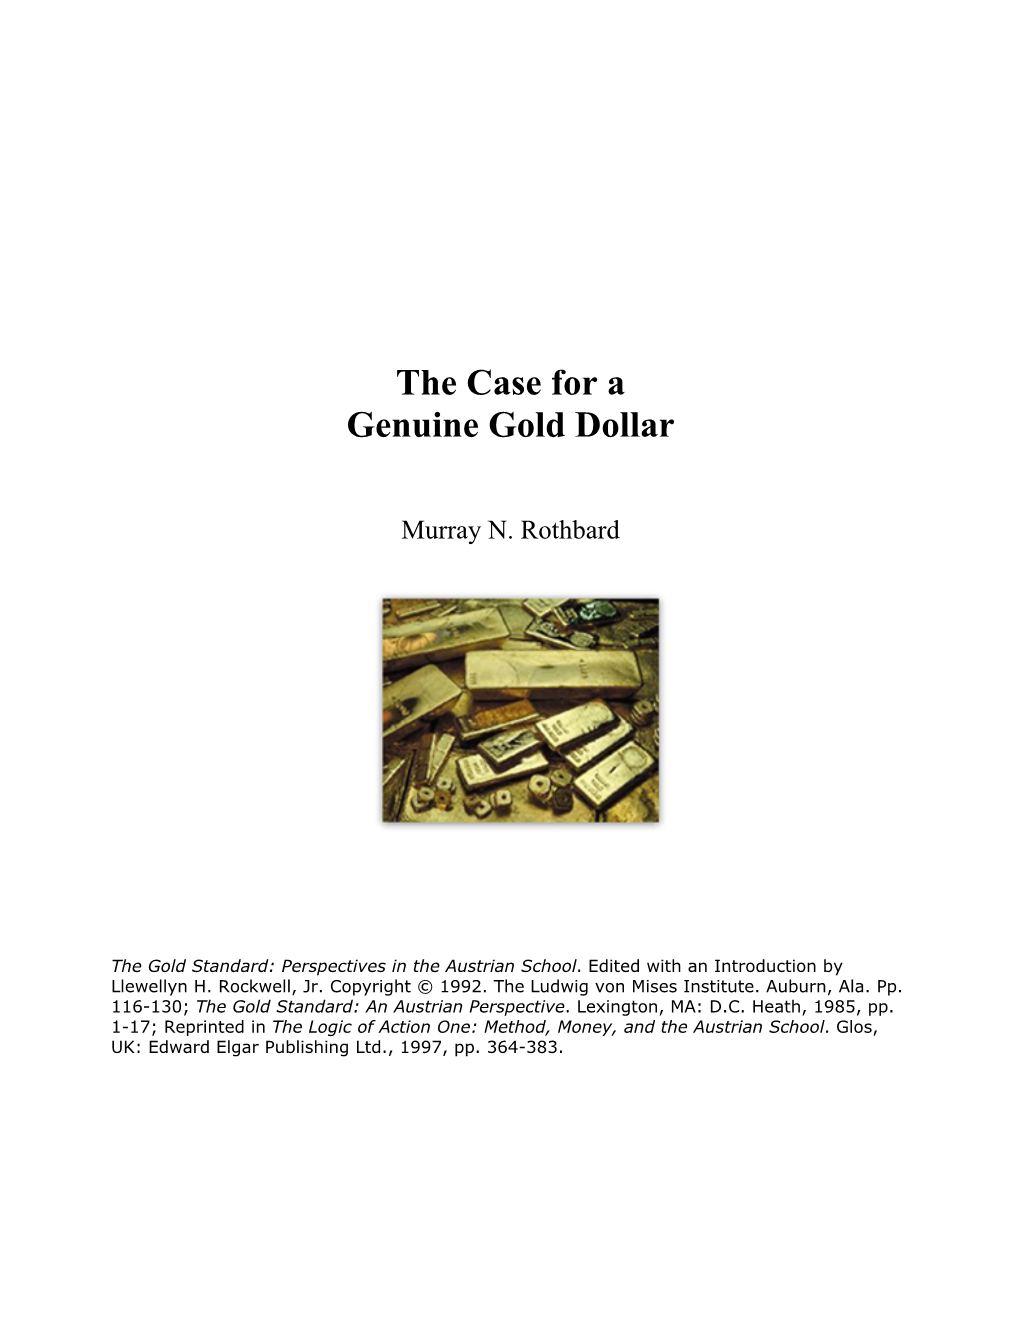 The Case for the Genuine Gold Dollar, by Murray N. Rothbard